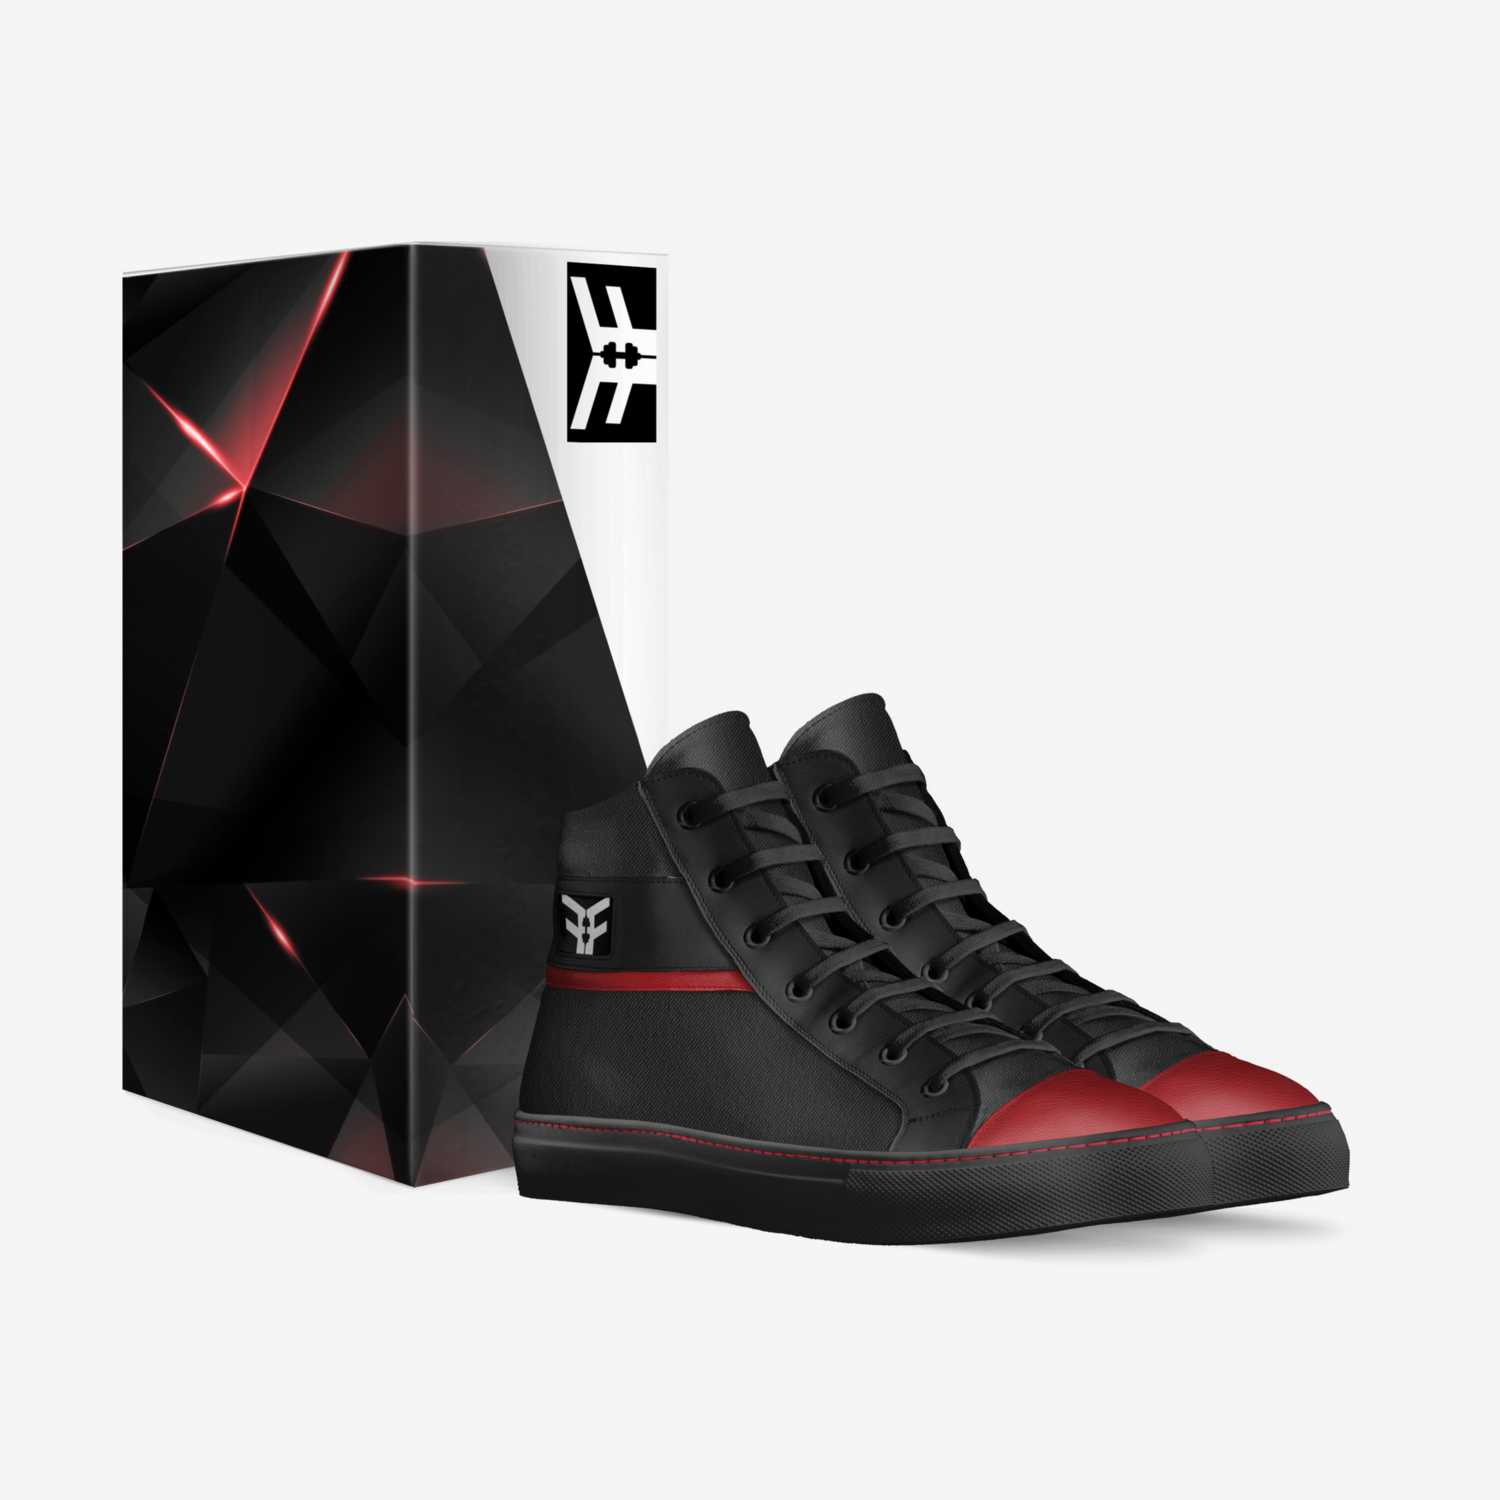 FlyFit custom made in Italy shoes by Martin Barnes | Box view